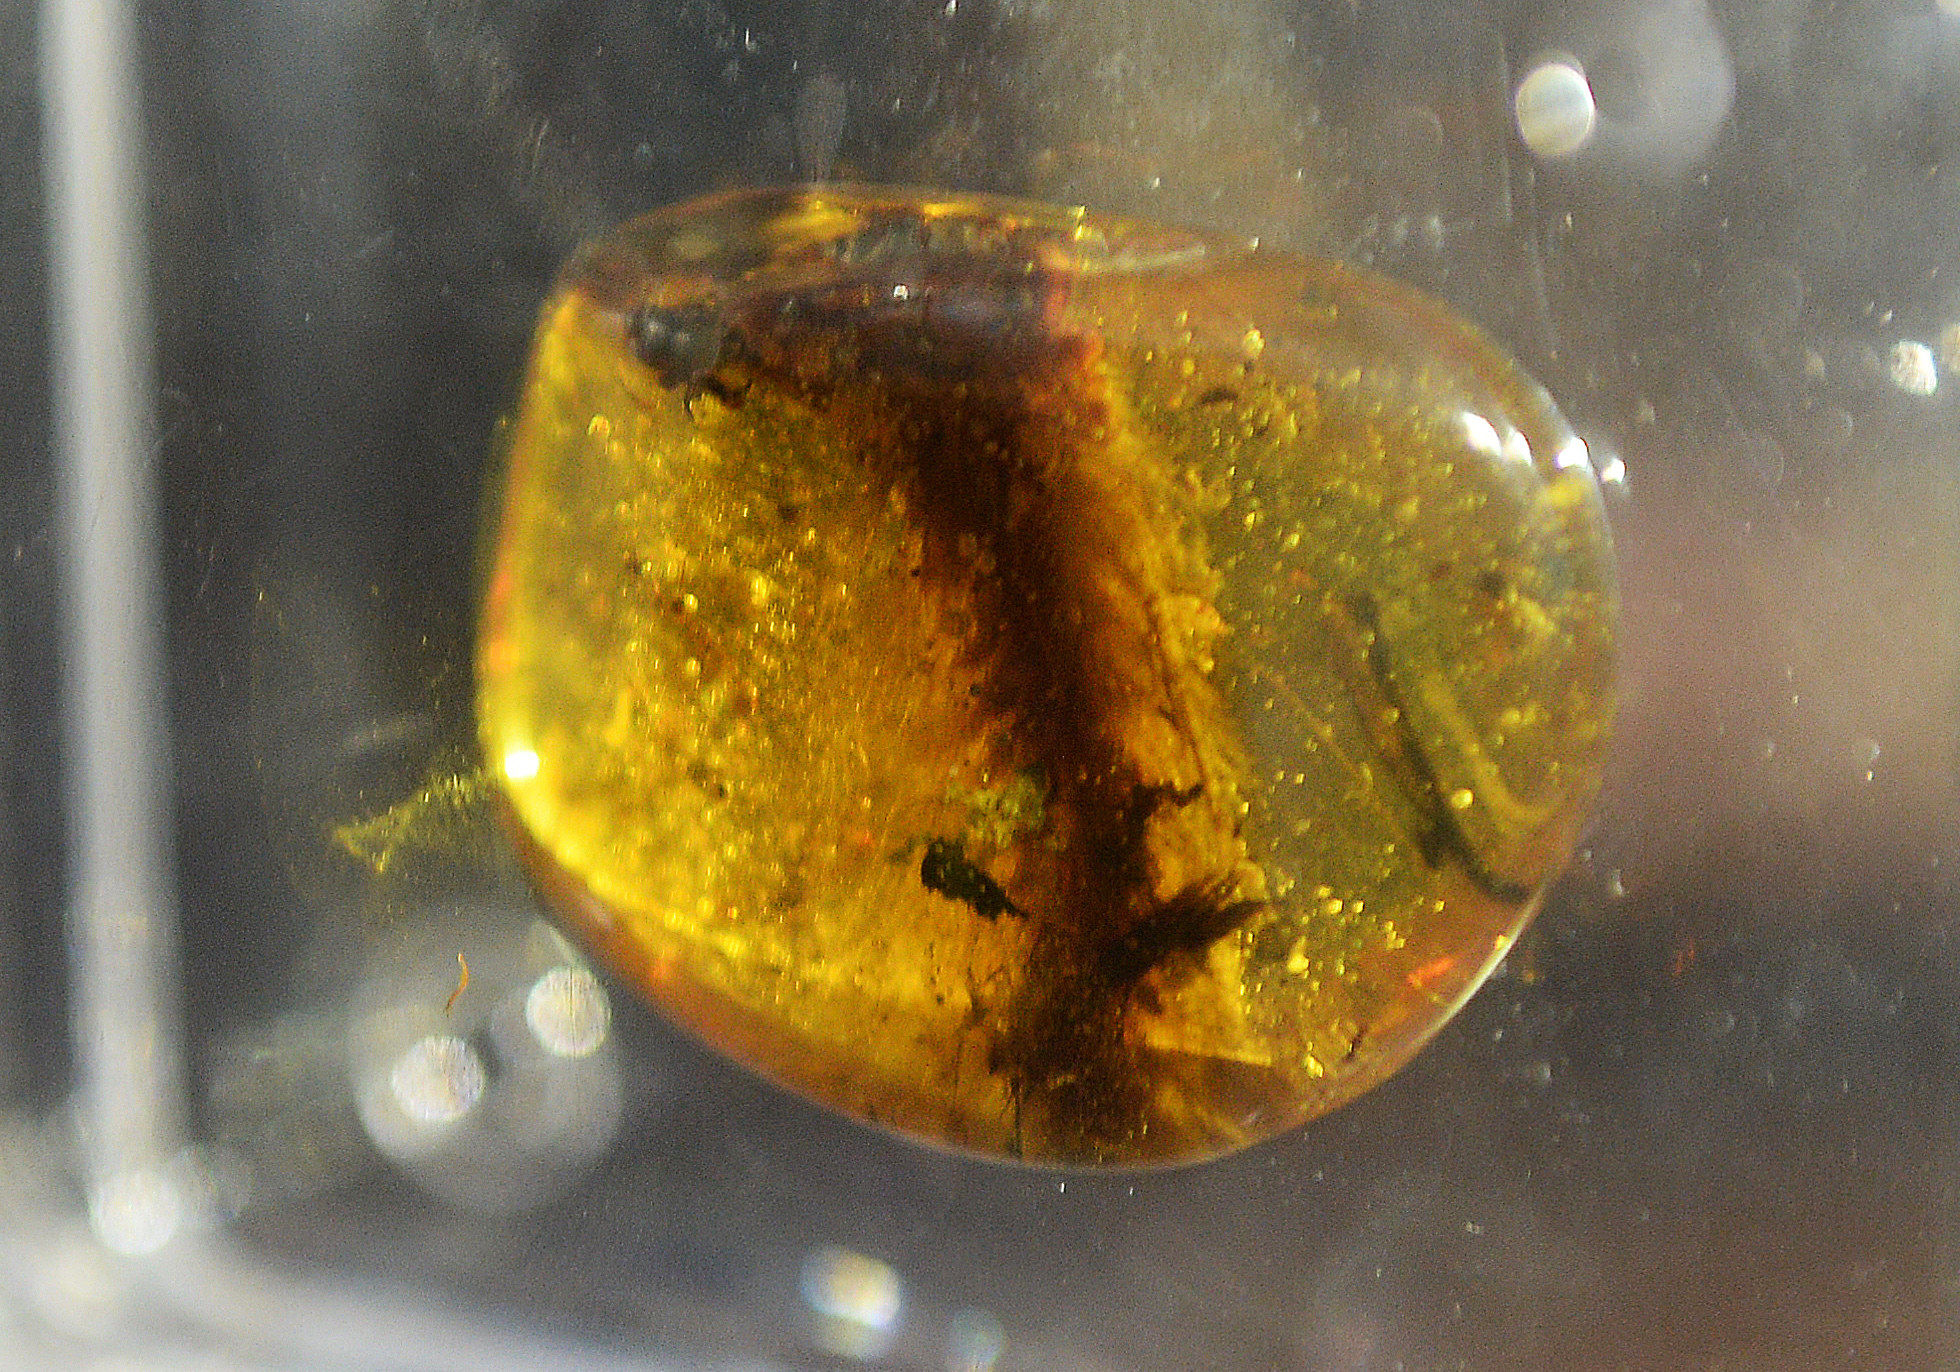 A piece of amber with a dinosaur tail inside